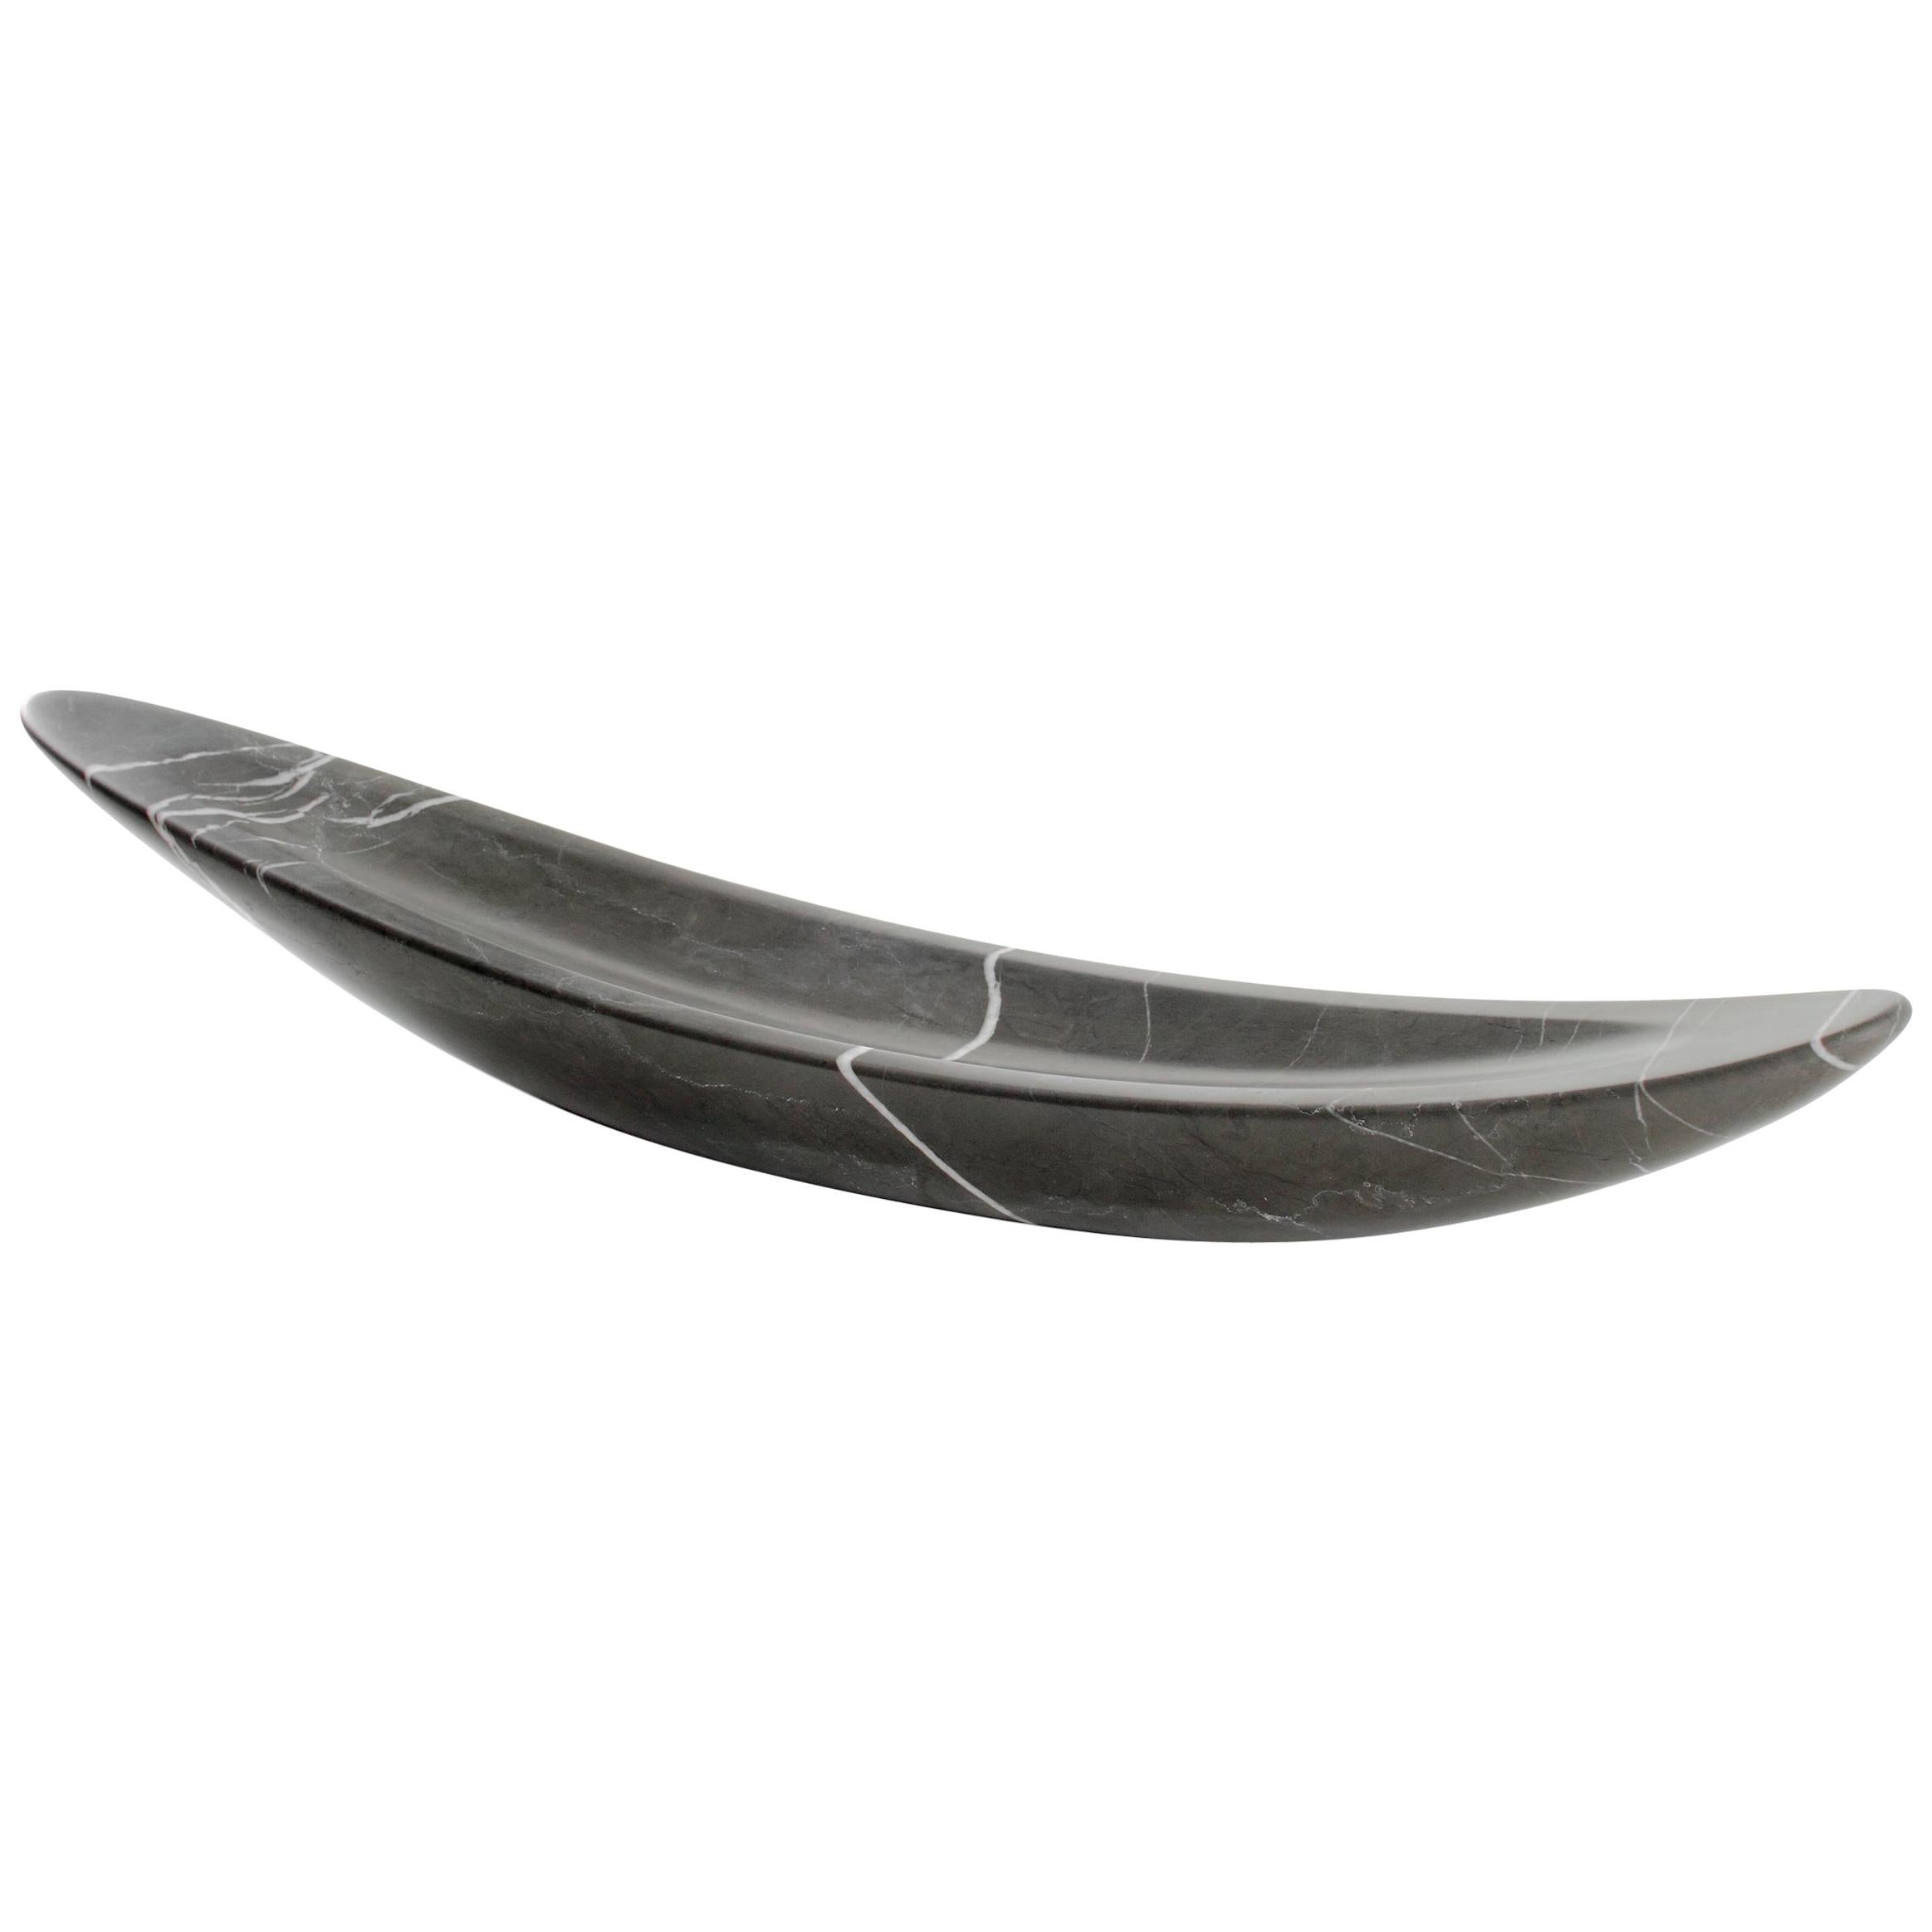 Decorative Bowl Sculpture Solid Imperial Grey Marble Centerpiece Made in Italy For Sale